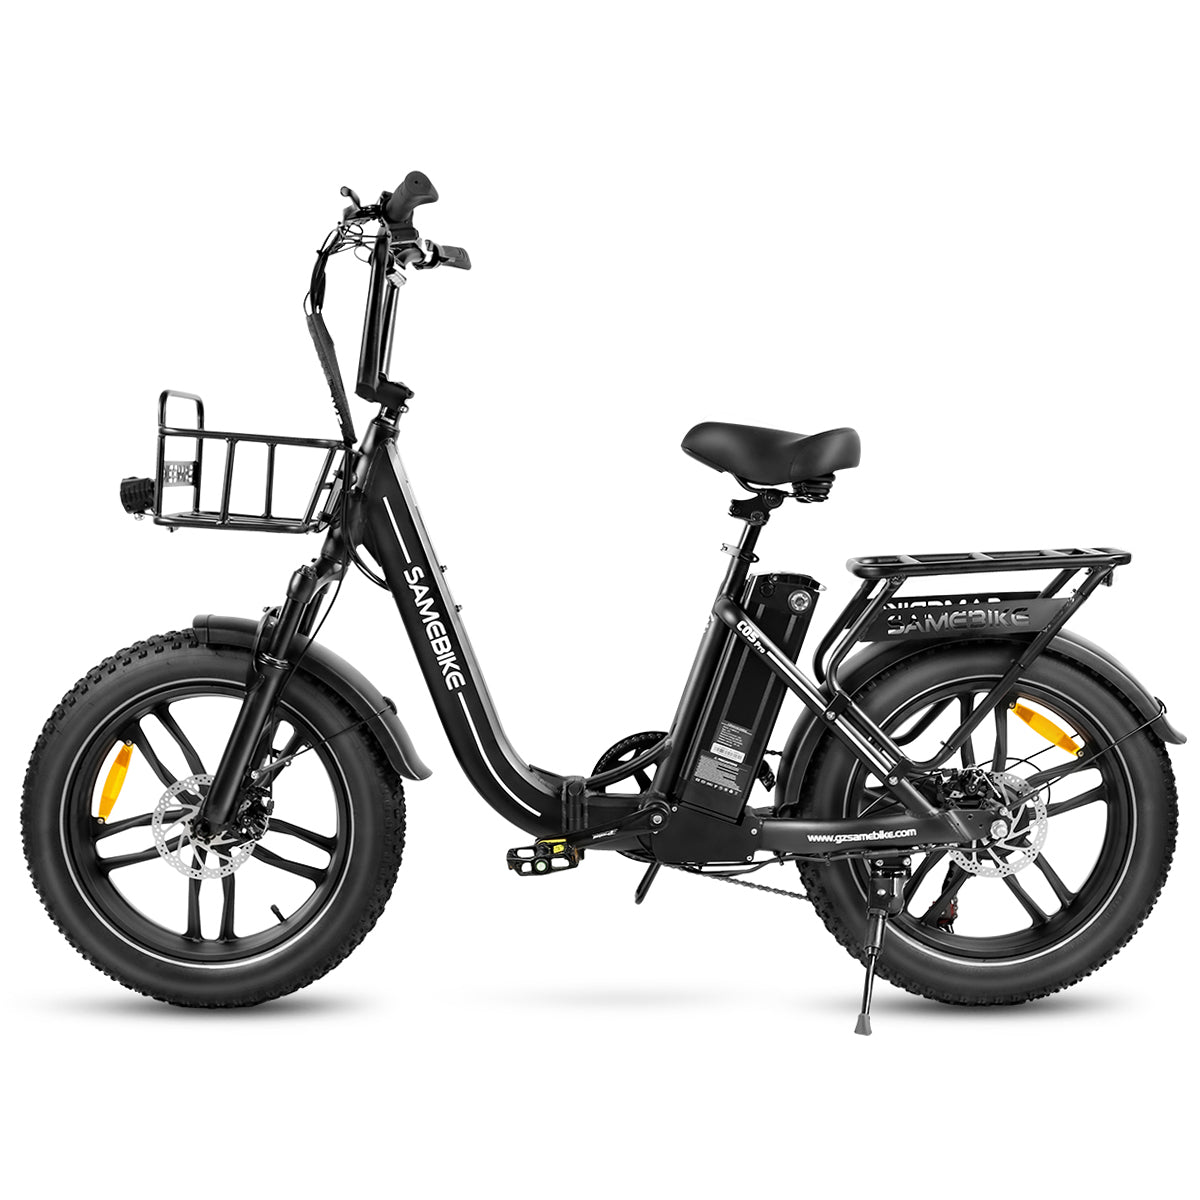 SAMEBIKE 20 Inch High-Speed Electric Mtb Bike with 36V Lithium Battery Power Supply Overseas Warranty RTS